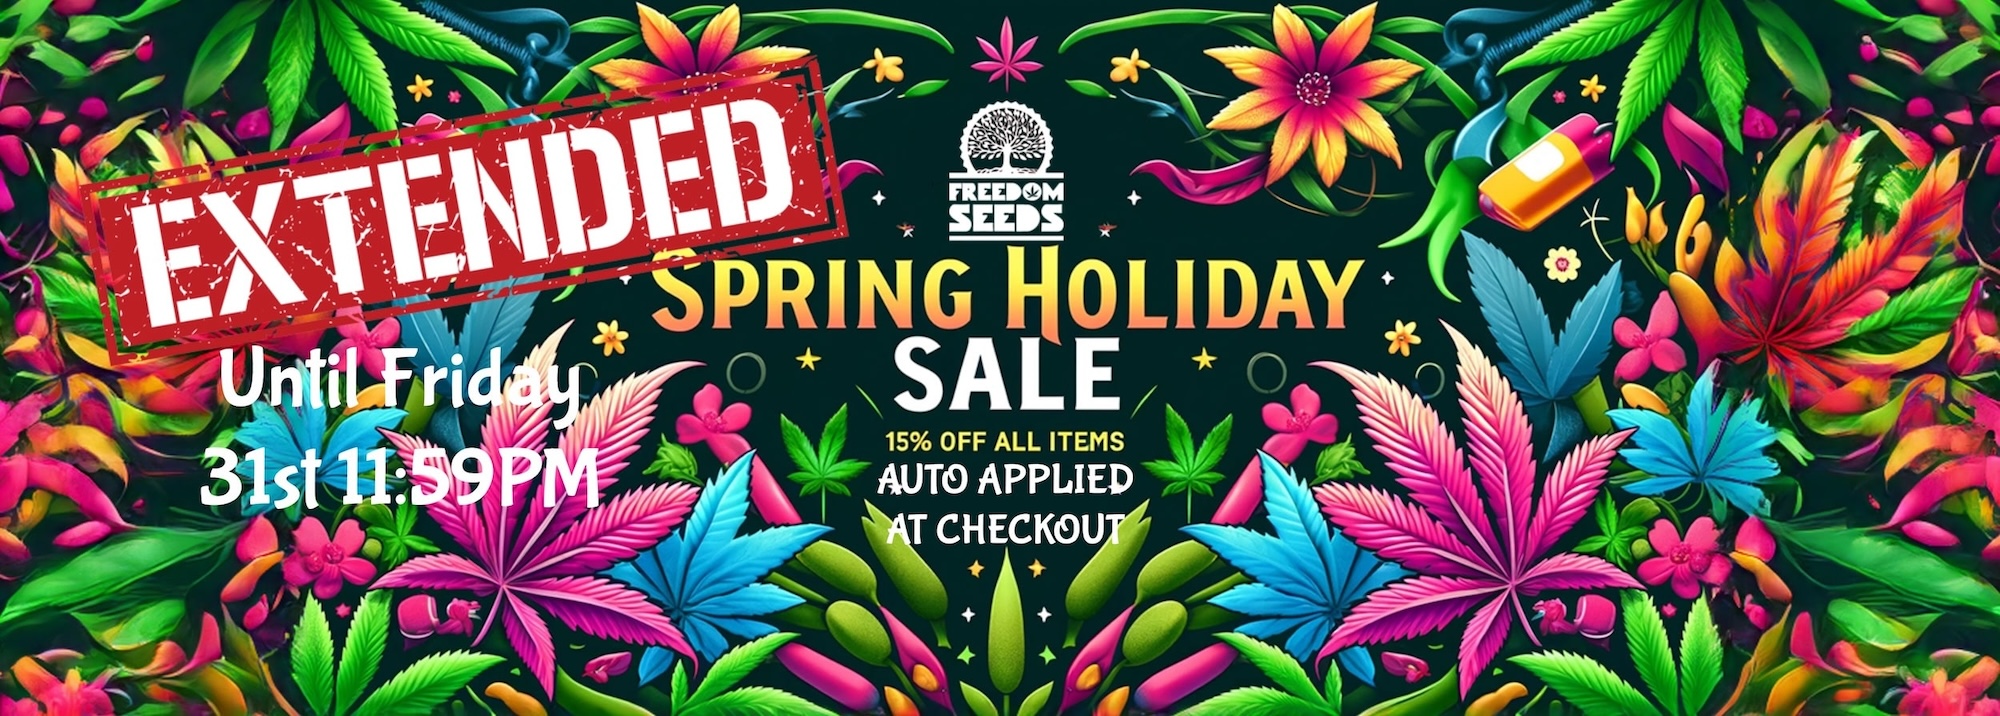 Spring holiday sale(extended)